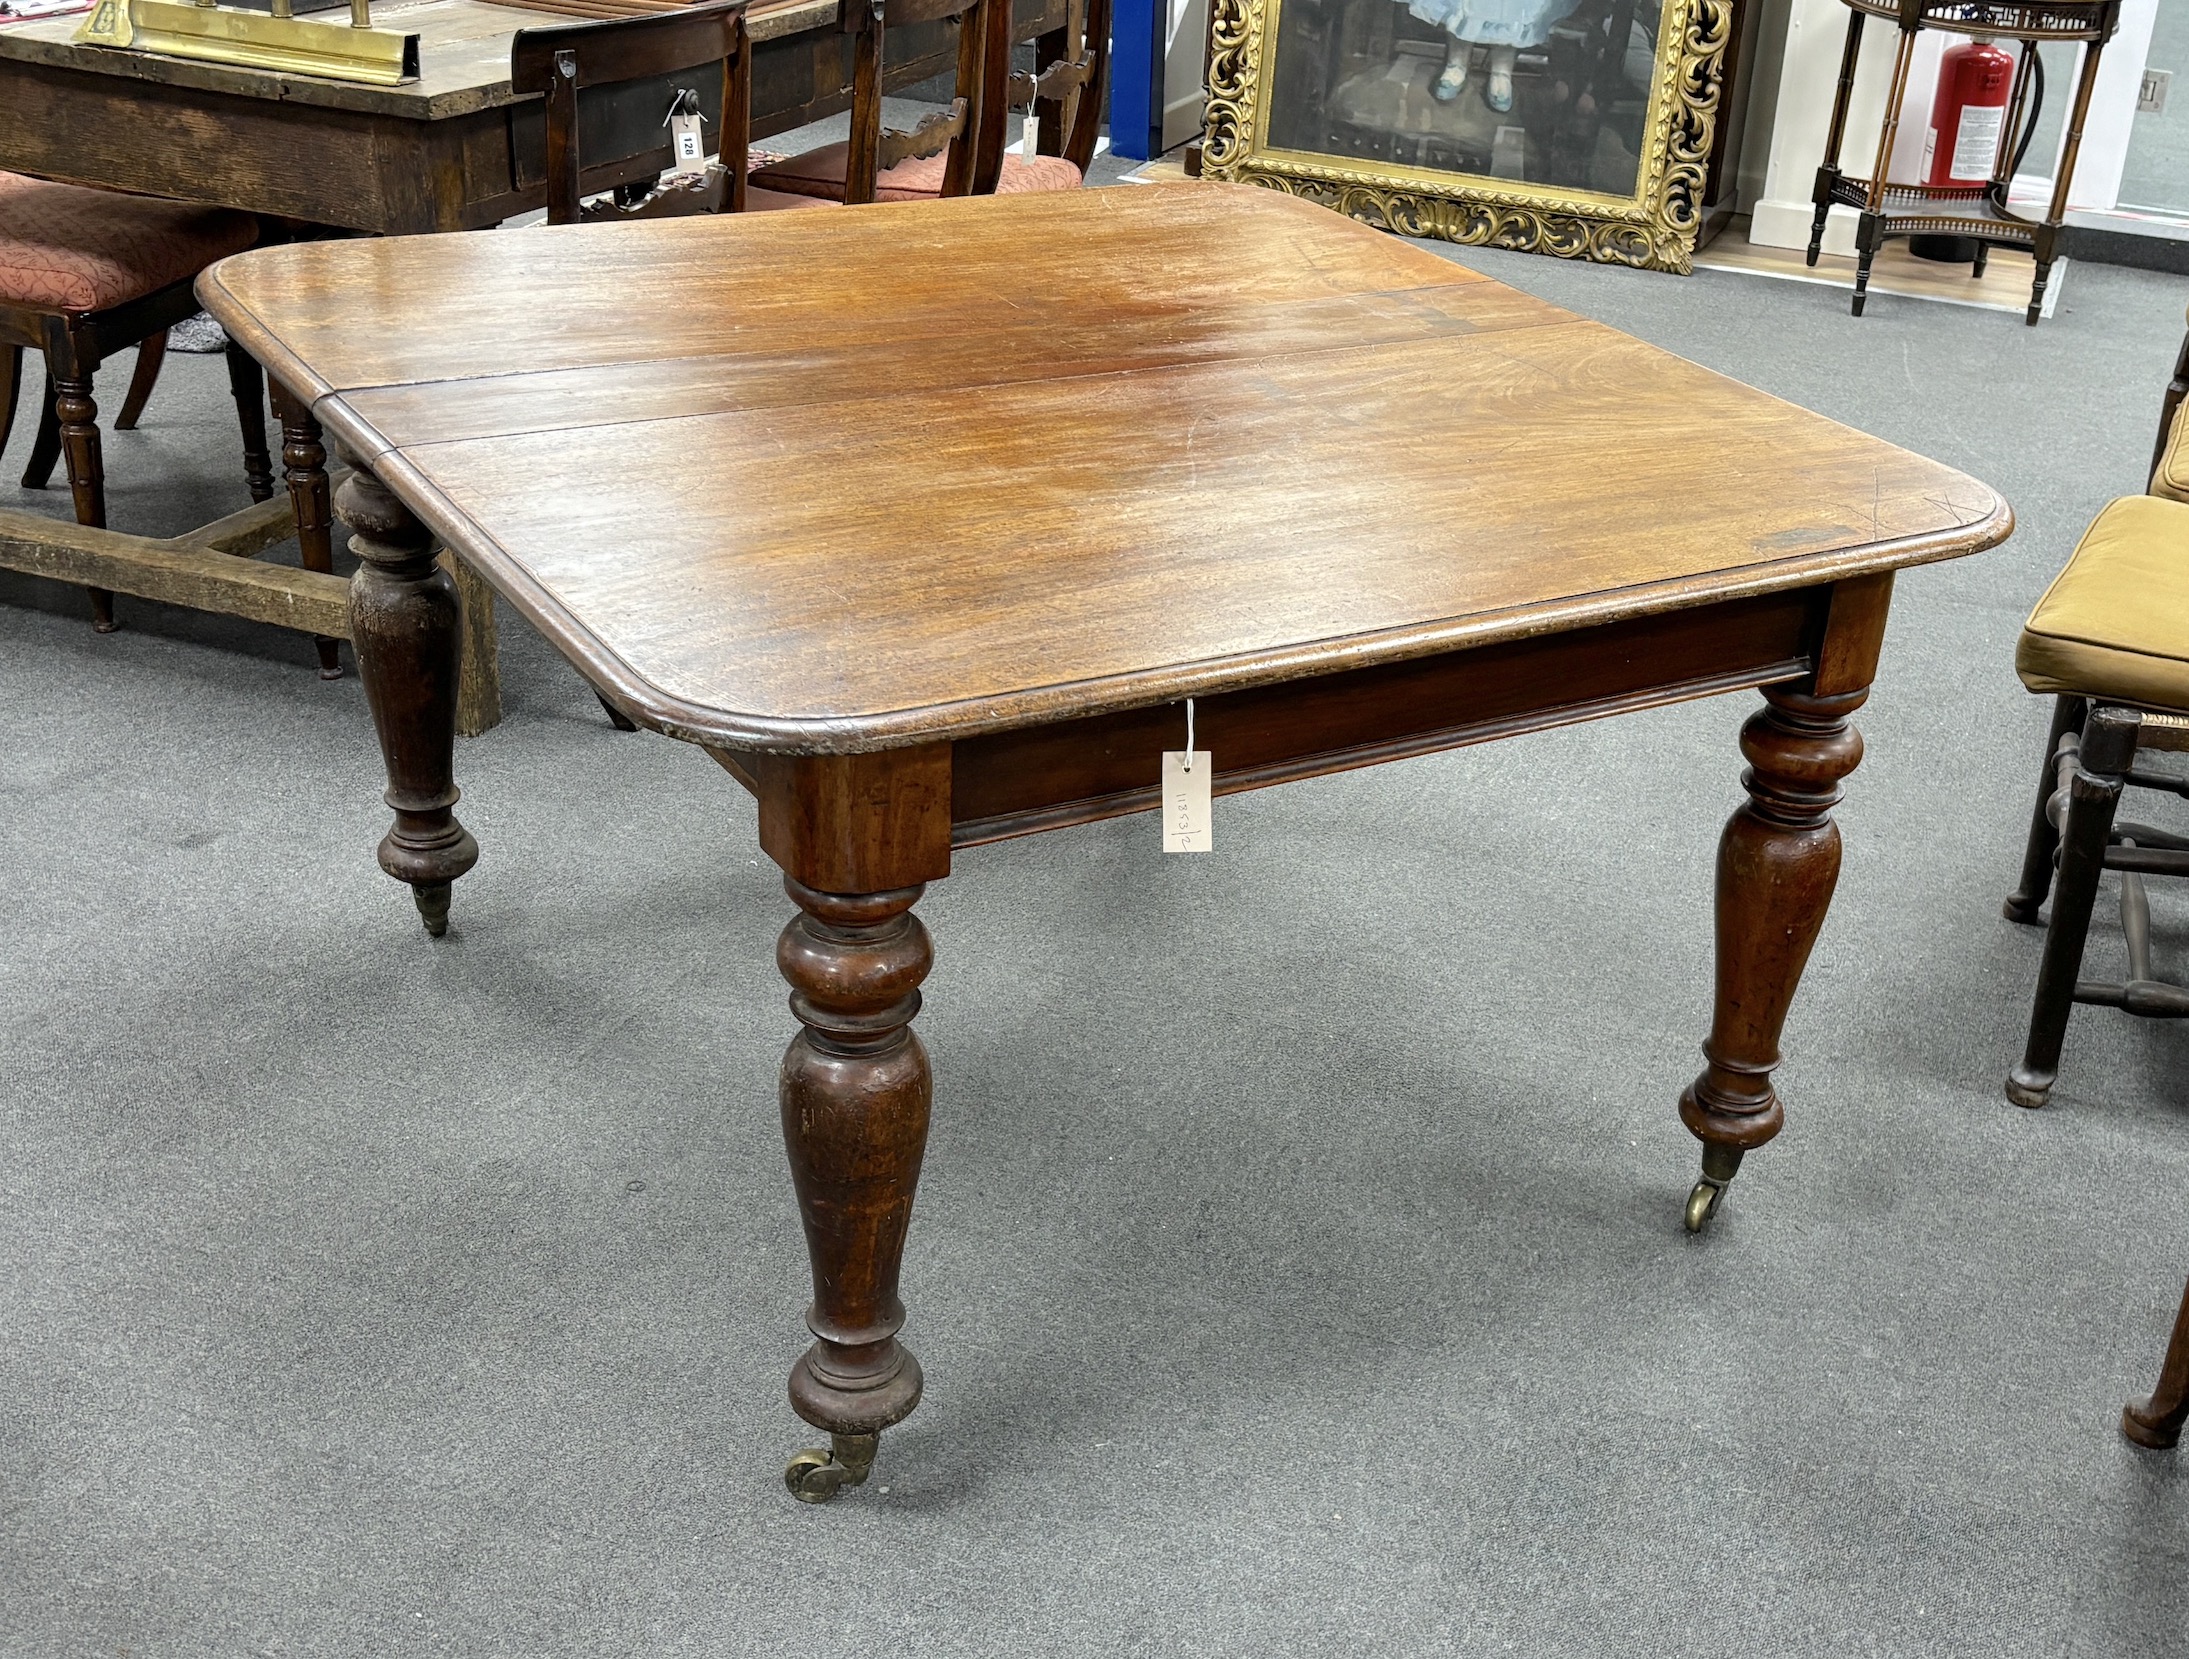 A Victorian mahogany dining table, no leaves, width 128cm, depth 122cm, height 73cm